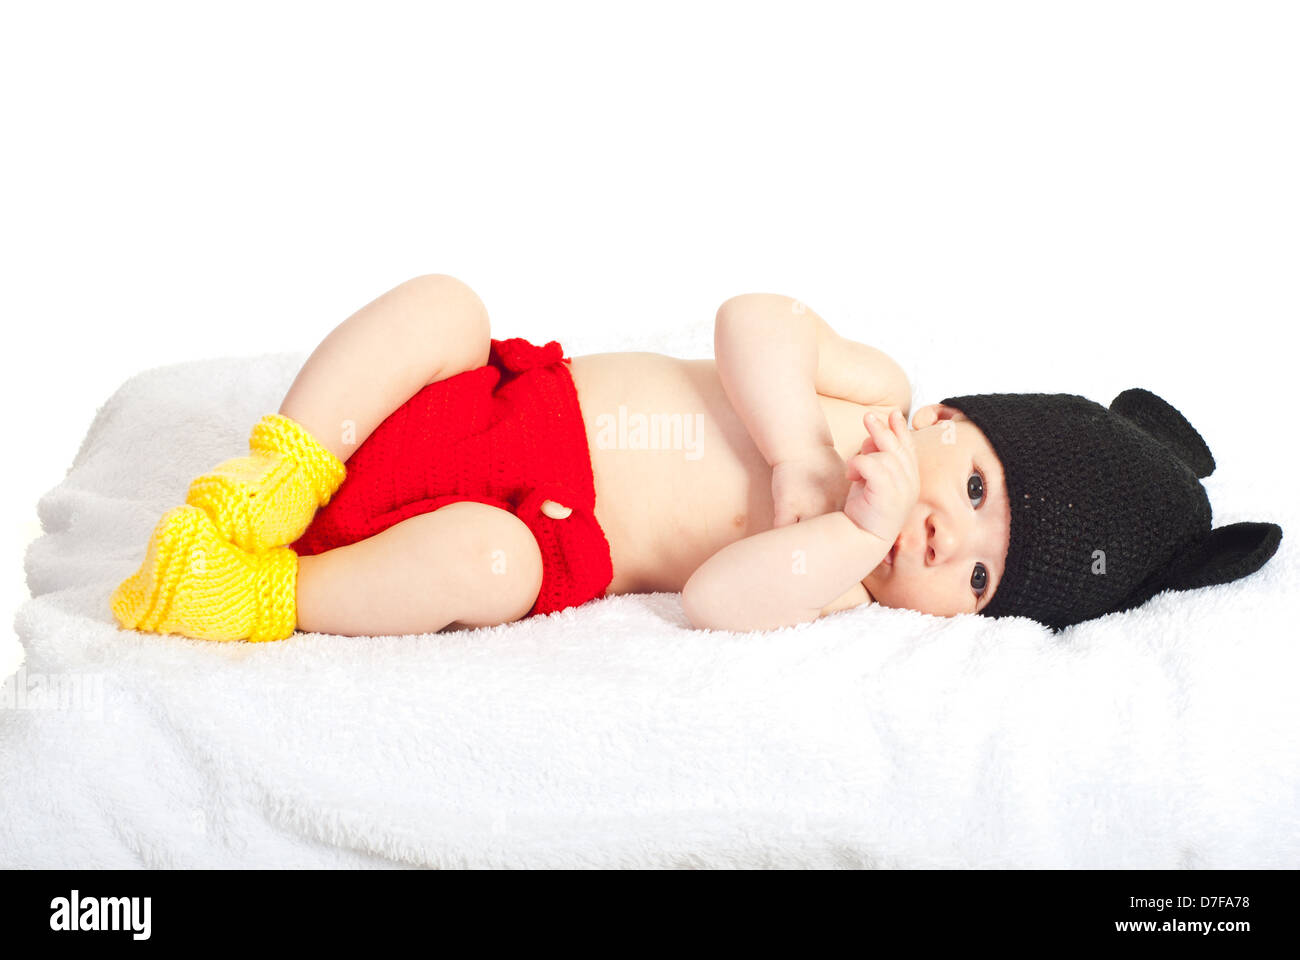 Beautiful newborn baby lying down on fluffy blanket dressed in knitted costume isolated on white background Stock Photo